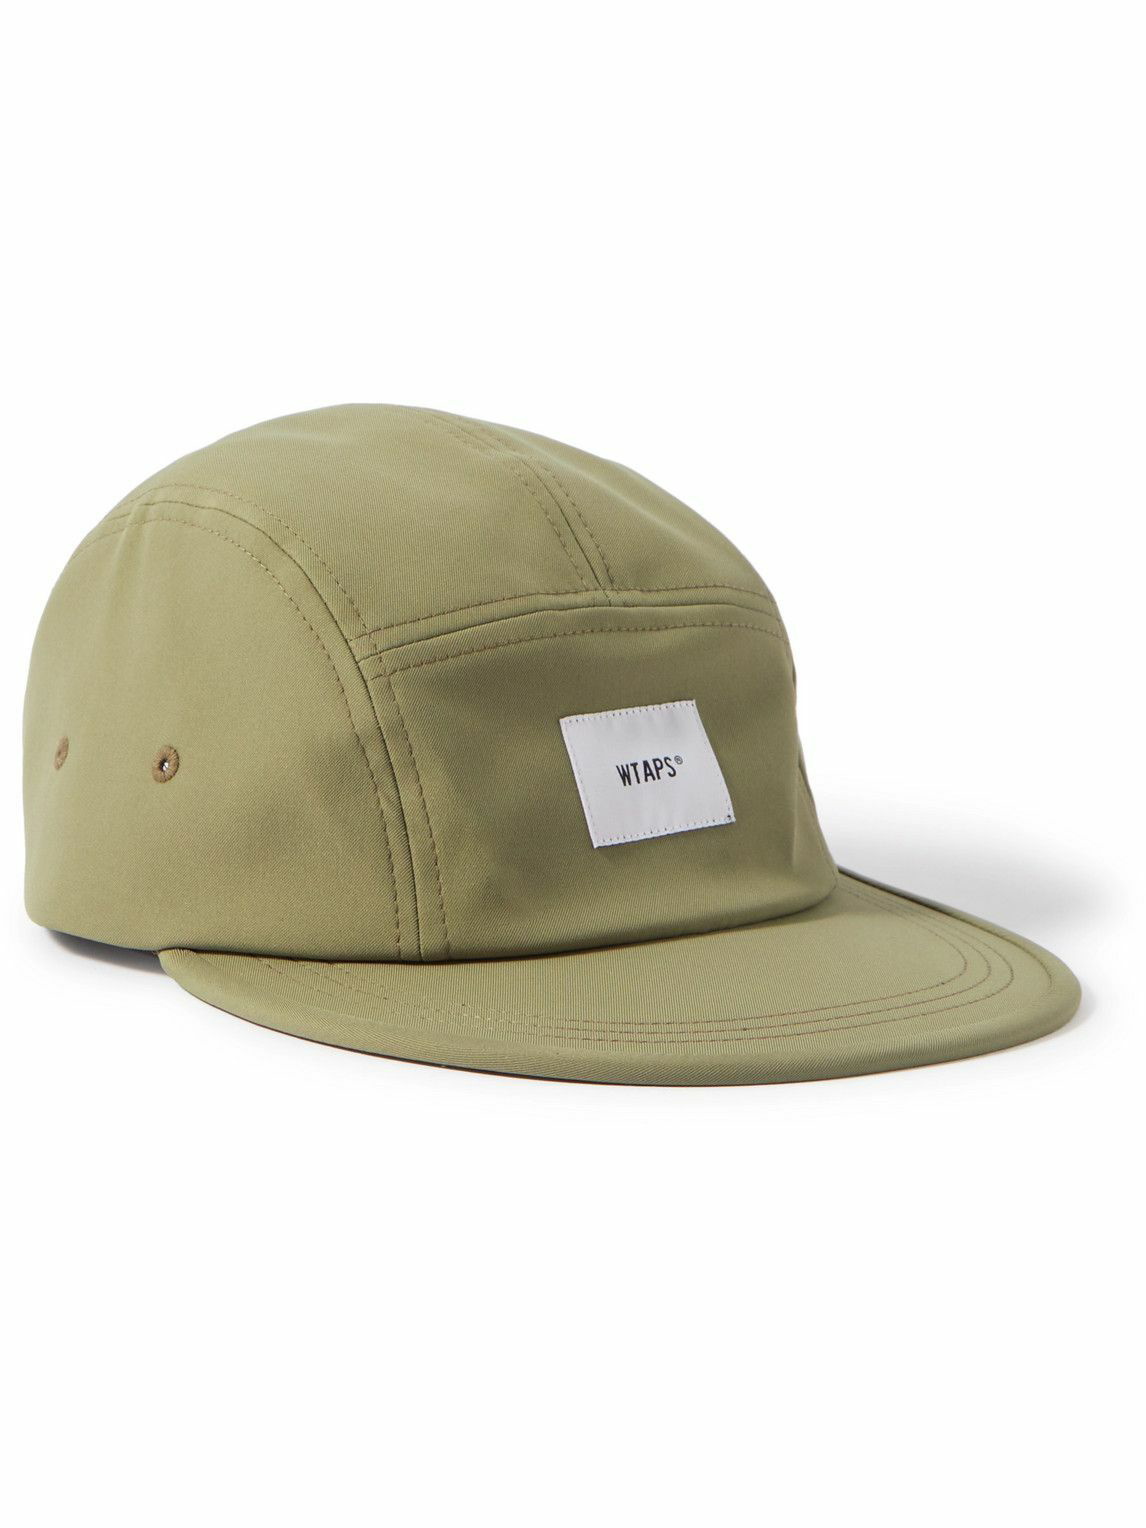 WTAPS T-5 /CAP / SYNTHETIC - ハット